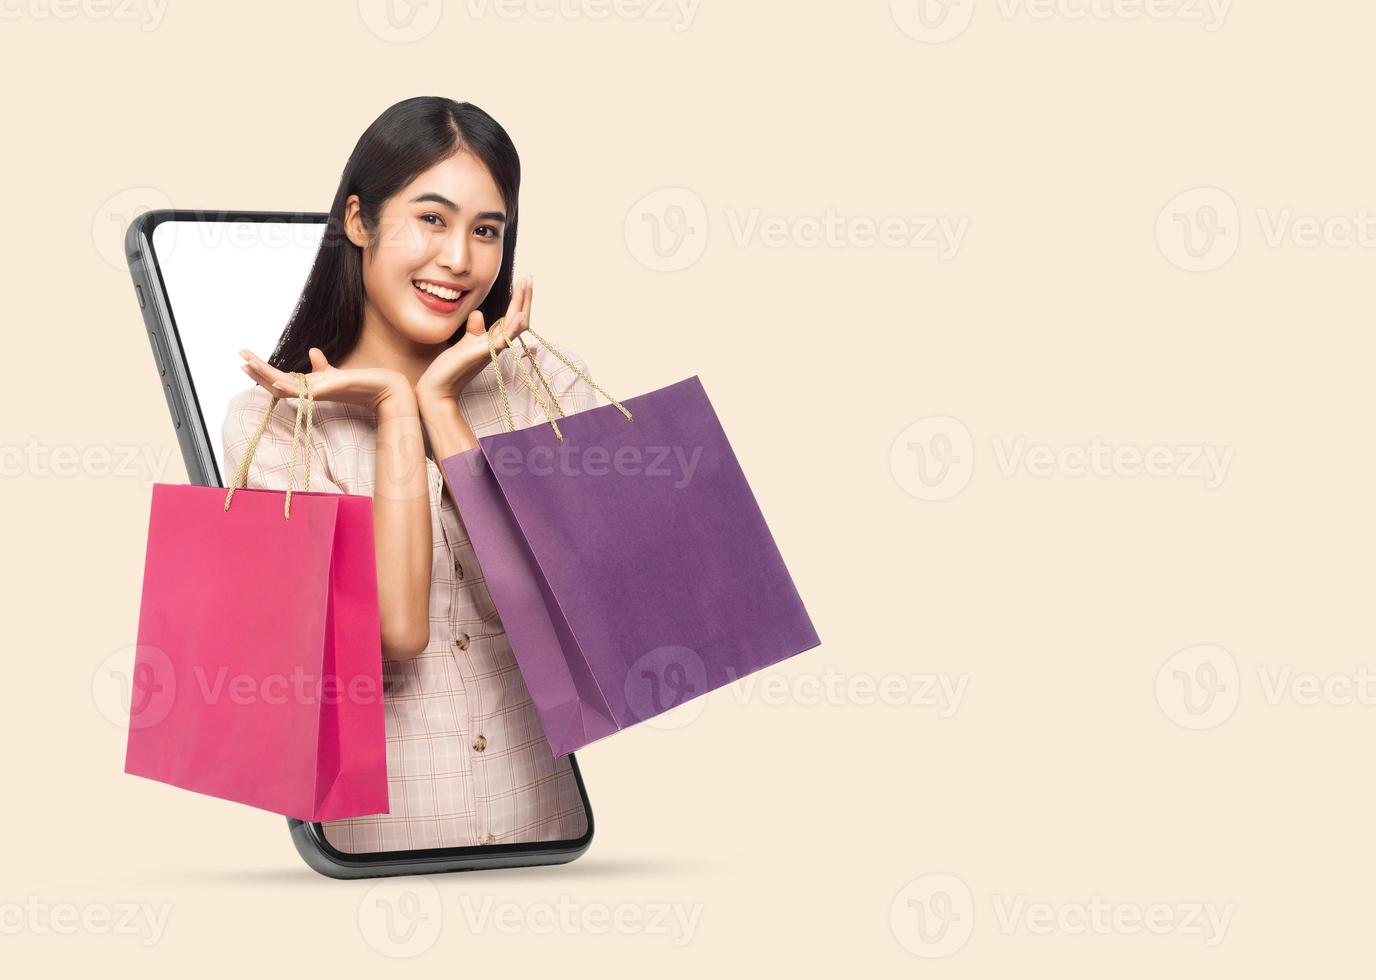 Young woman holding shopping bags via smartphone photo